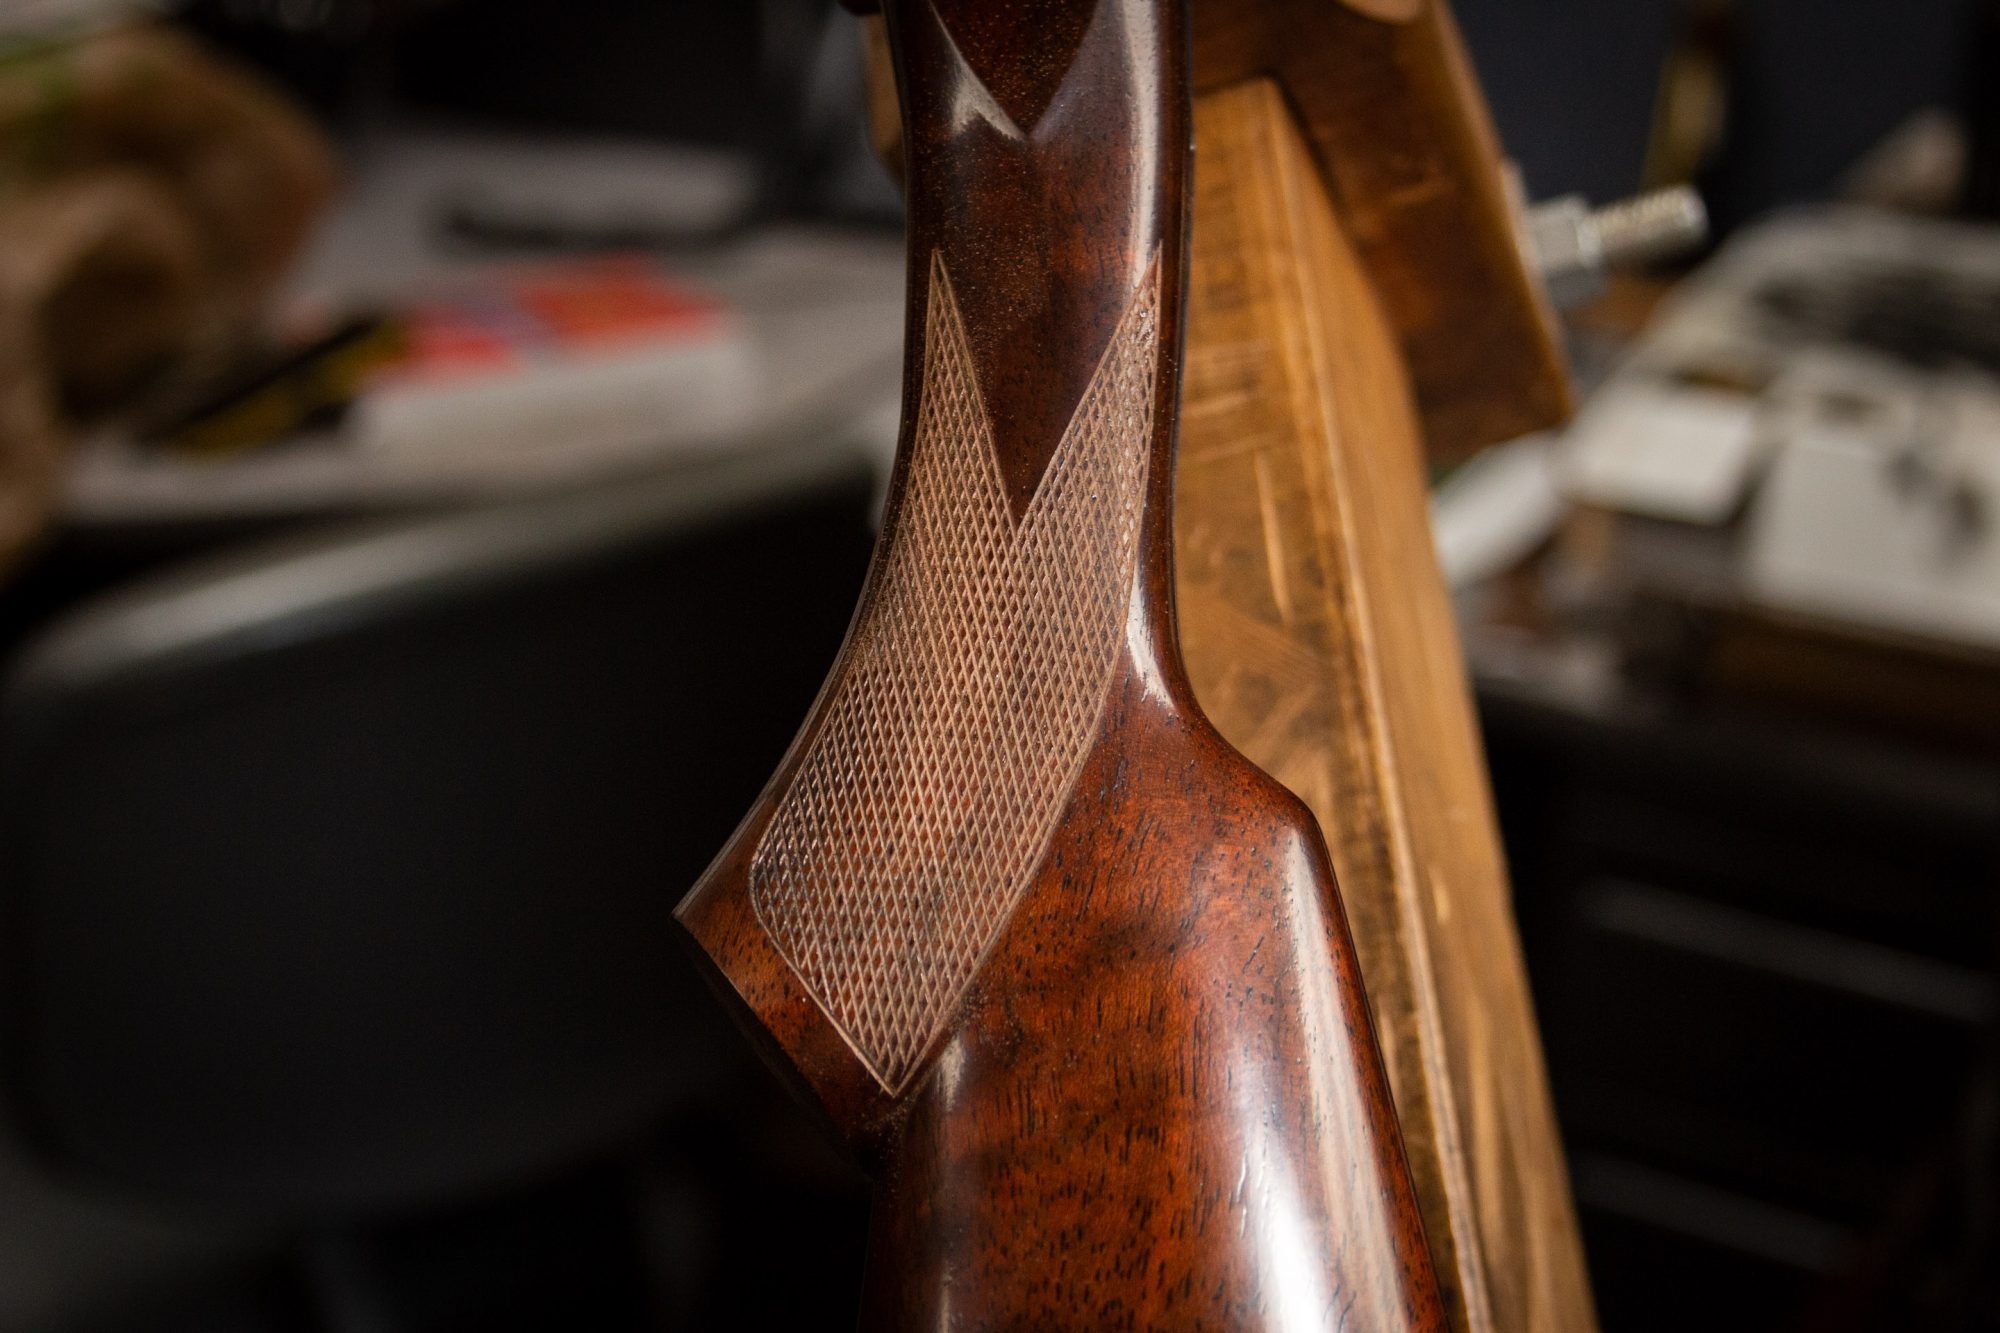 Fox Sterlingworth 12 Gauge Shotgun from 1932, during restoration work performed by Turnbull Restoration Co. of Bloomfield, NY